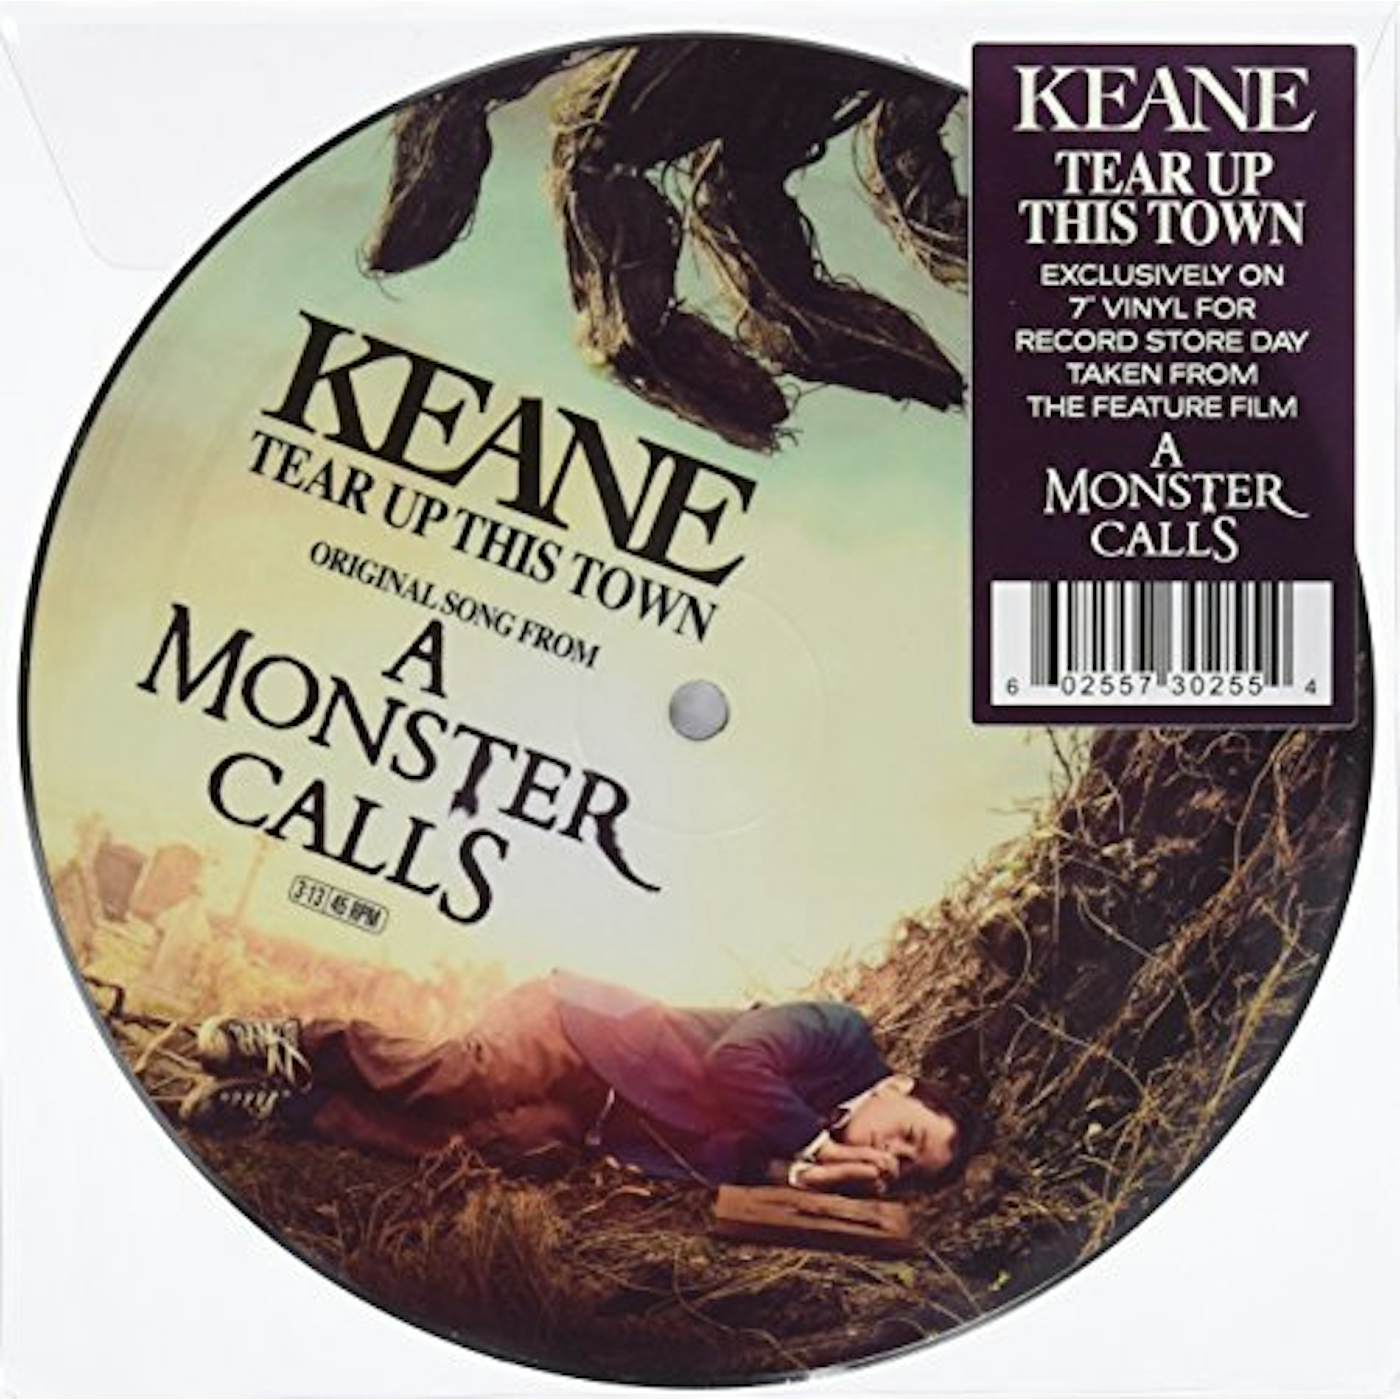 Keane Tear Up This Town Vinyl Record